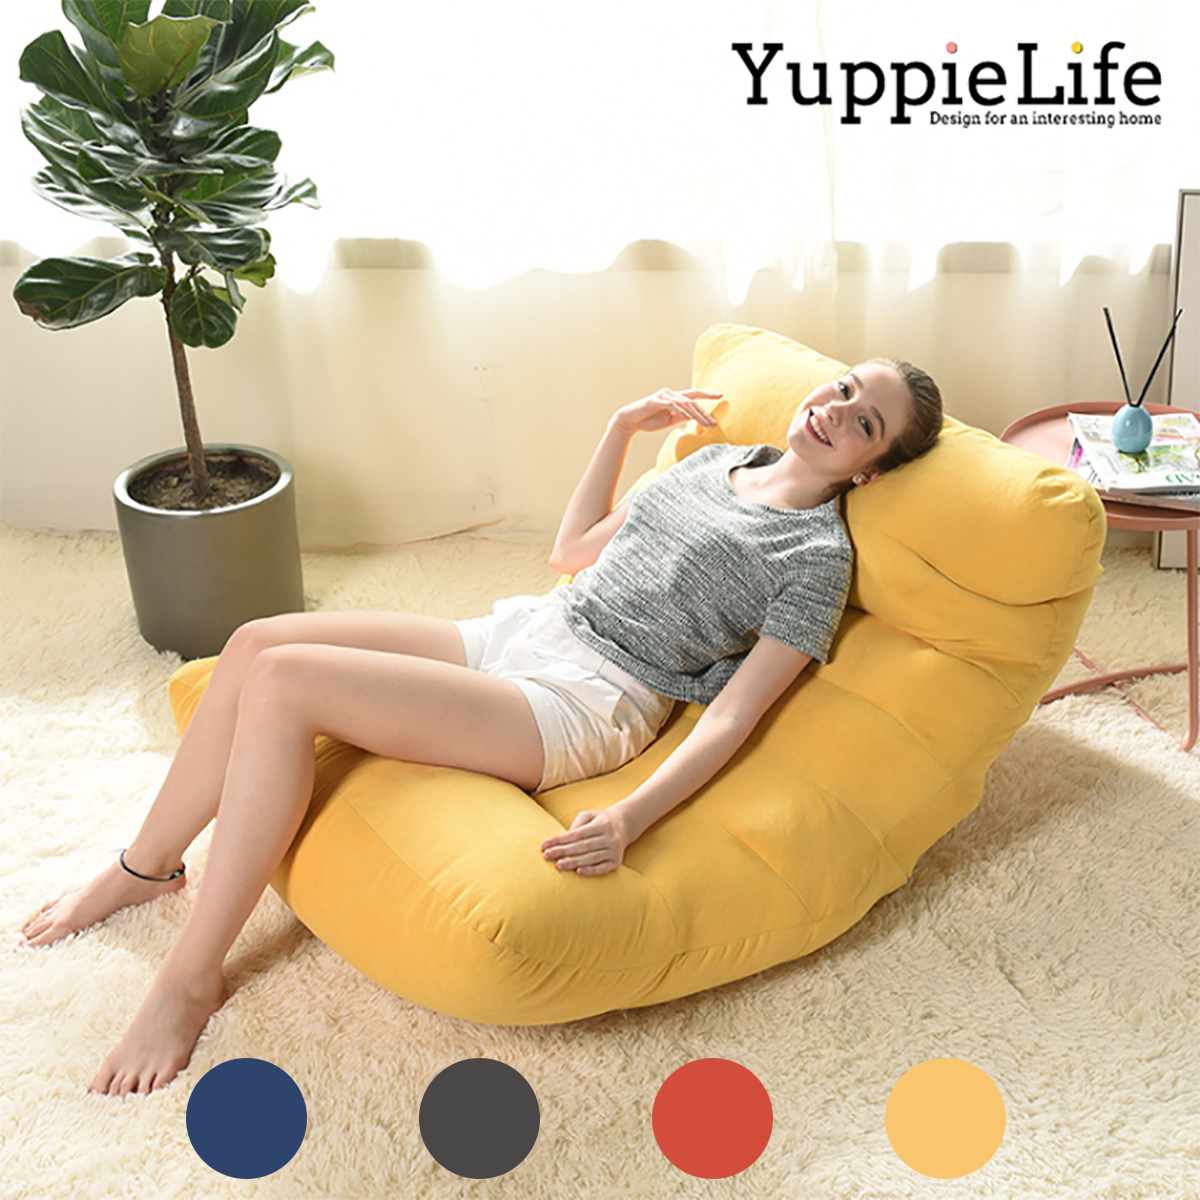 Outdoor-Portable-Large-Bean-Bag-Bed-Lounger-Sofa-Slipcover-Adult-Gaming-Seat-Chair-Protector-1462660-1